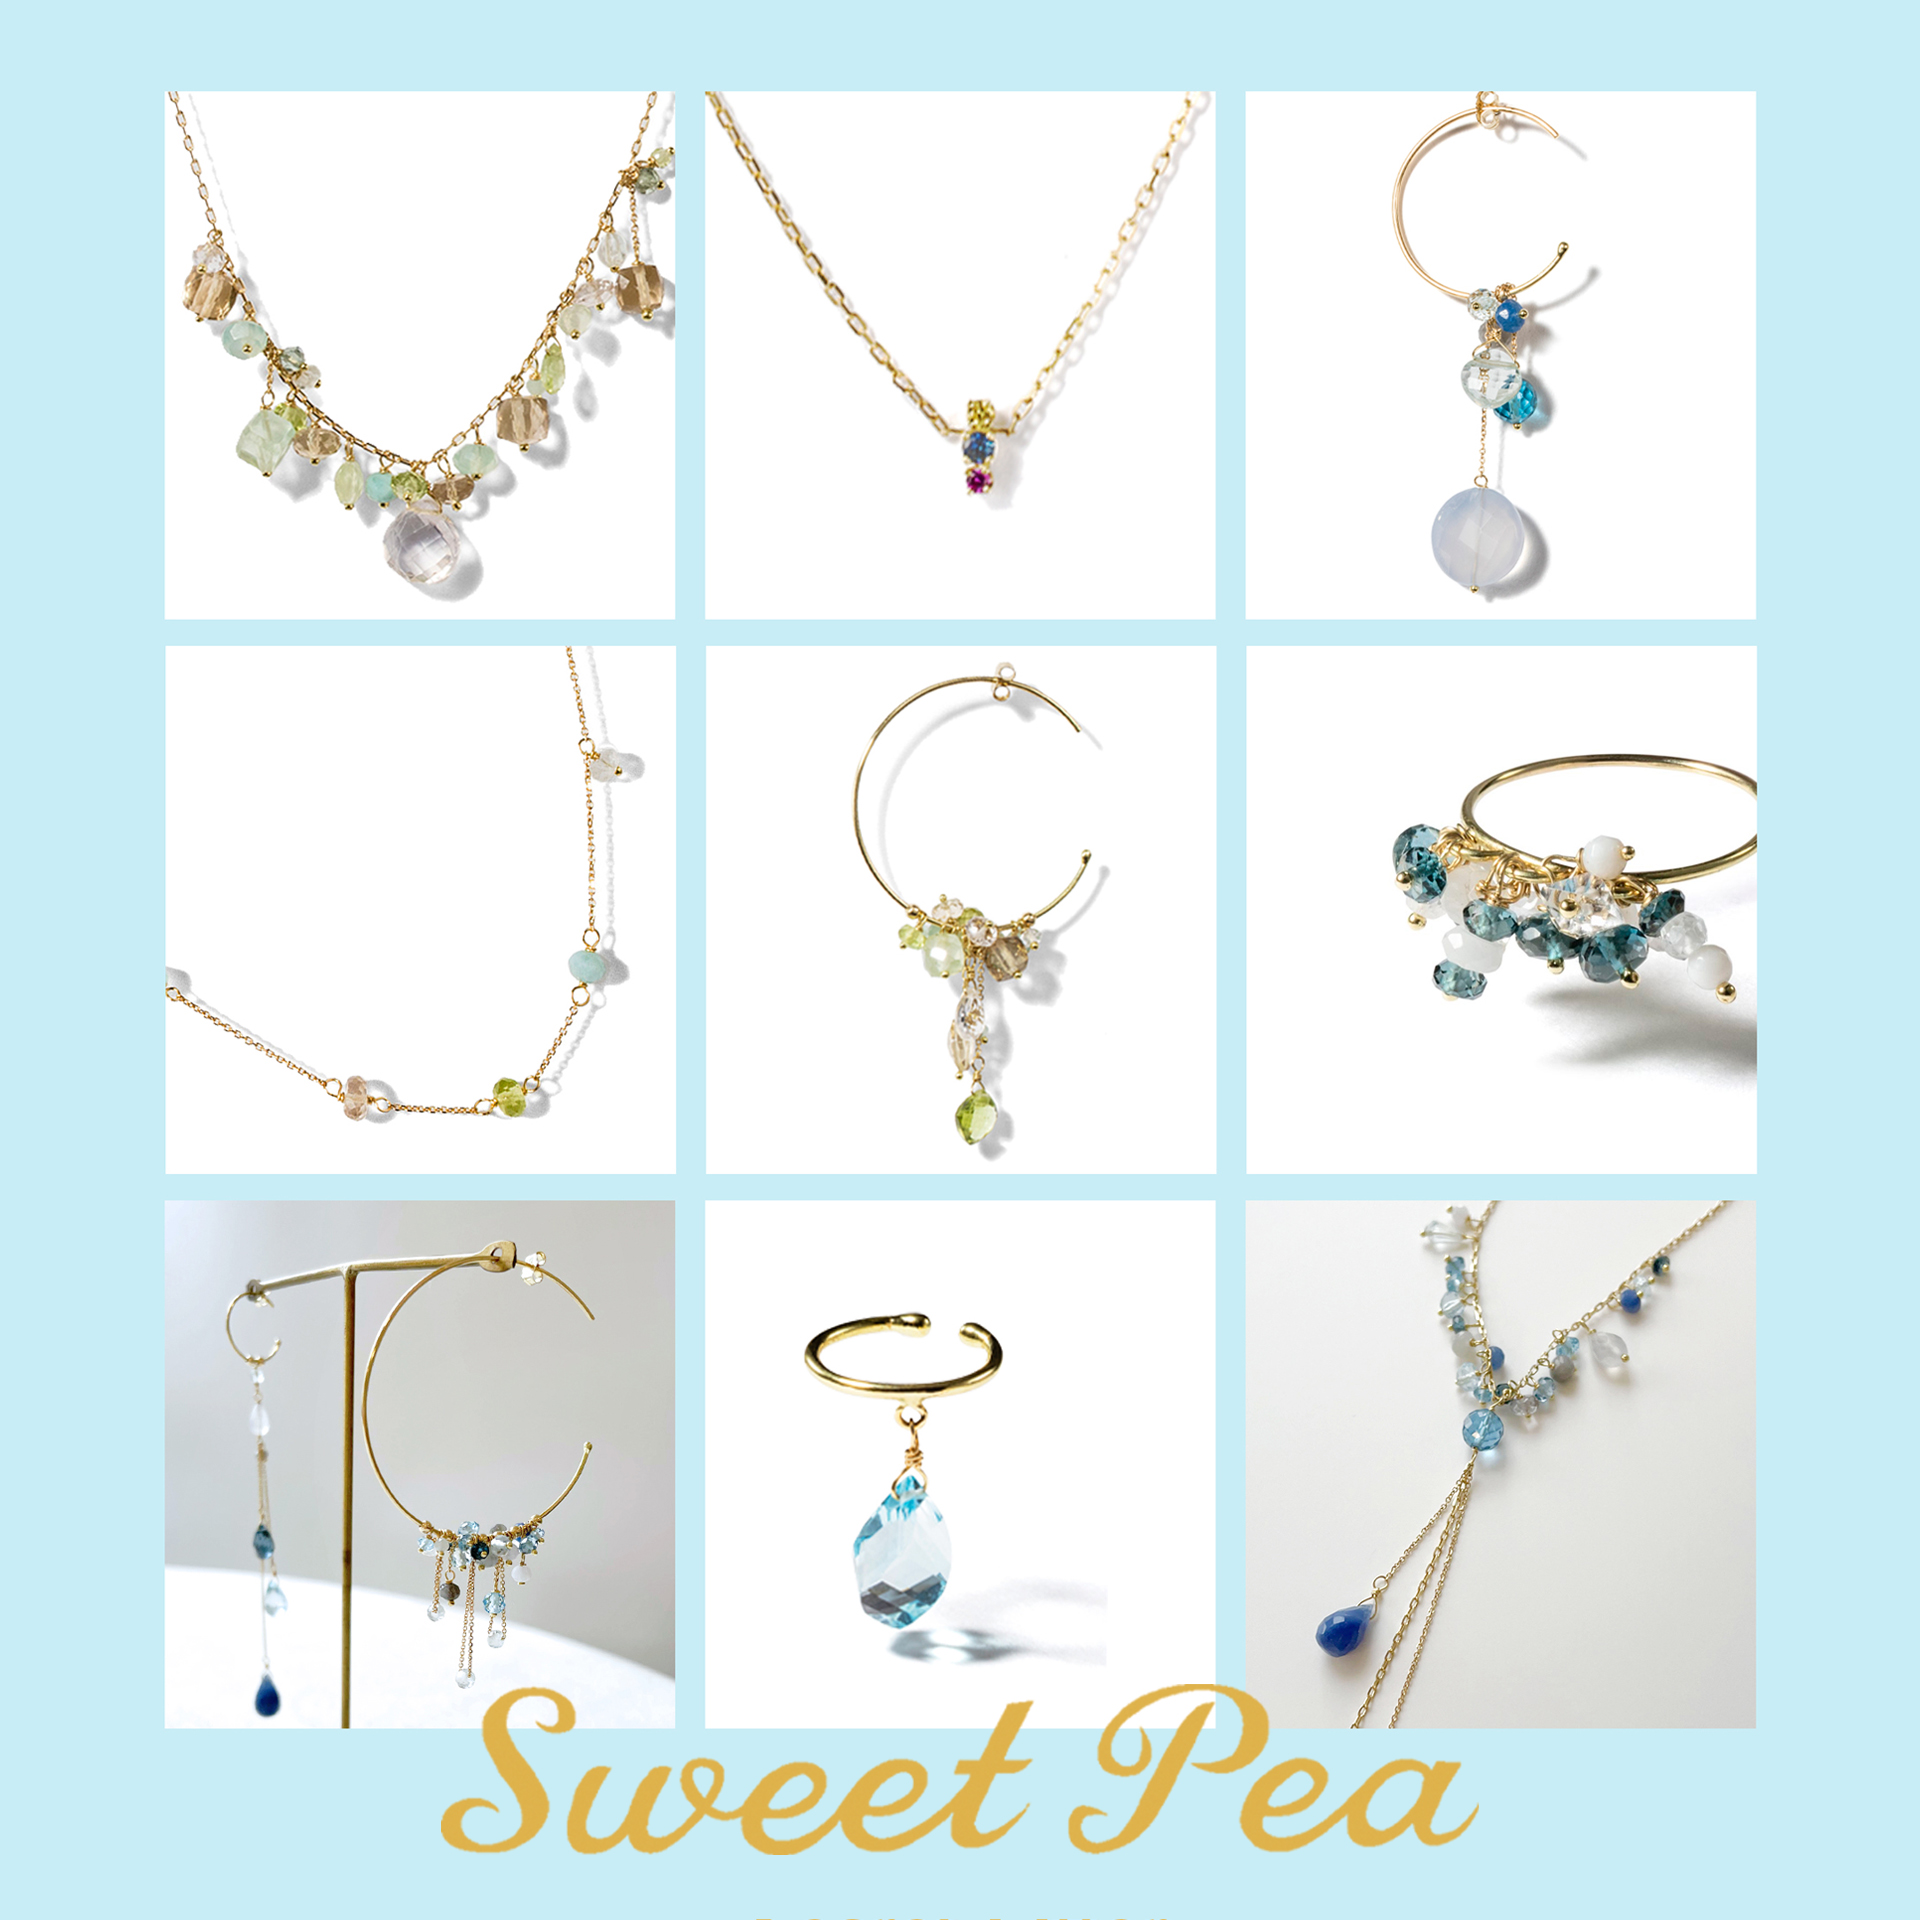 SWEET PEA】期間限定ジュエリーフェア開催 !! ｜ H.P.FRANCE名古屋 ...